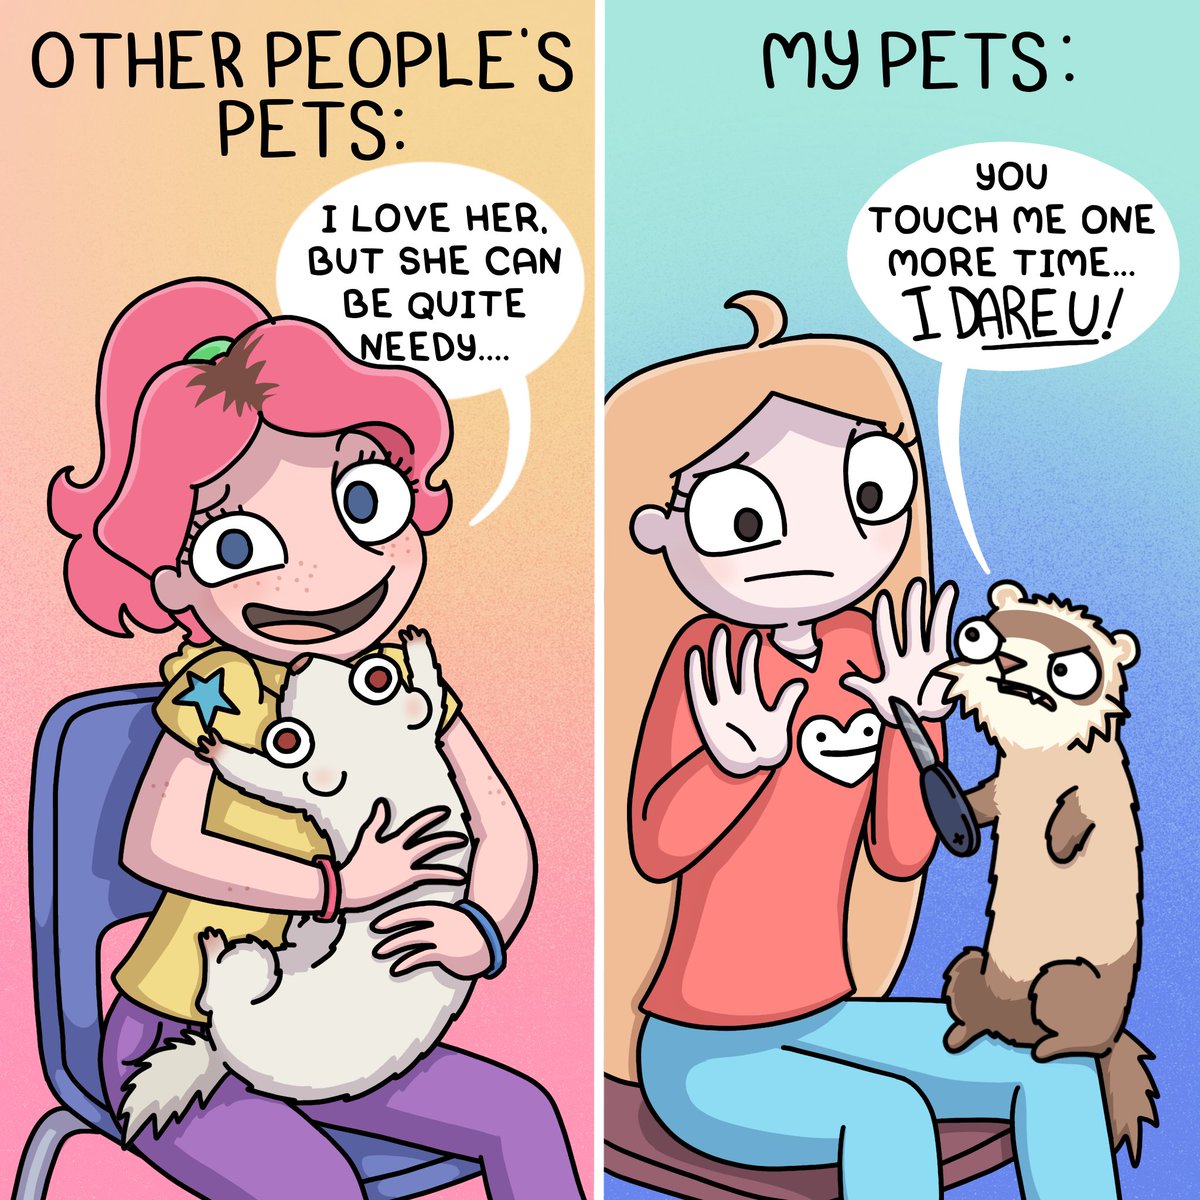 ThEy ArE NoT LiKe OtHeR PeTs... 🌶🌶
I am envious seeing people’s ferrets being super cuddly. My bois are spicy to the core, and I only get a few seconds of holding them , before they need to go go go again.🤣
#ferretlove #cartoon #petowner #comicstrip #funnycomics #ferretsofig